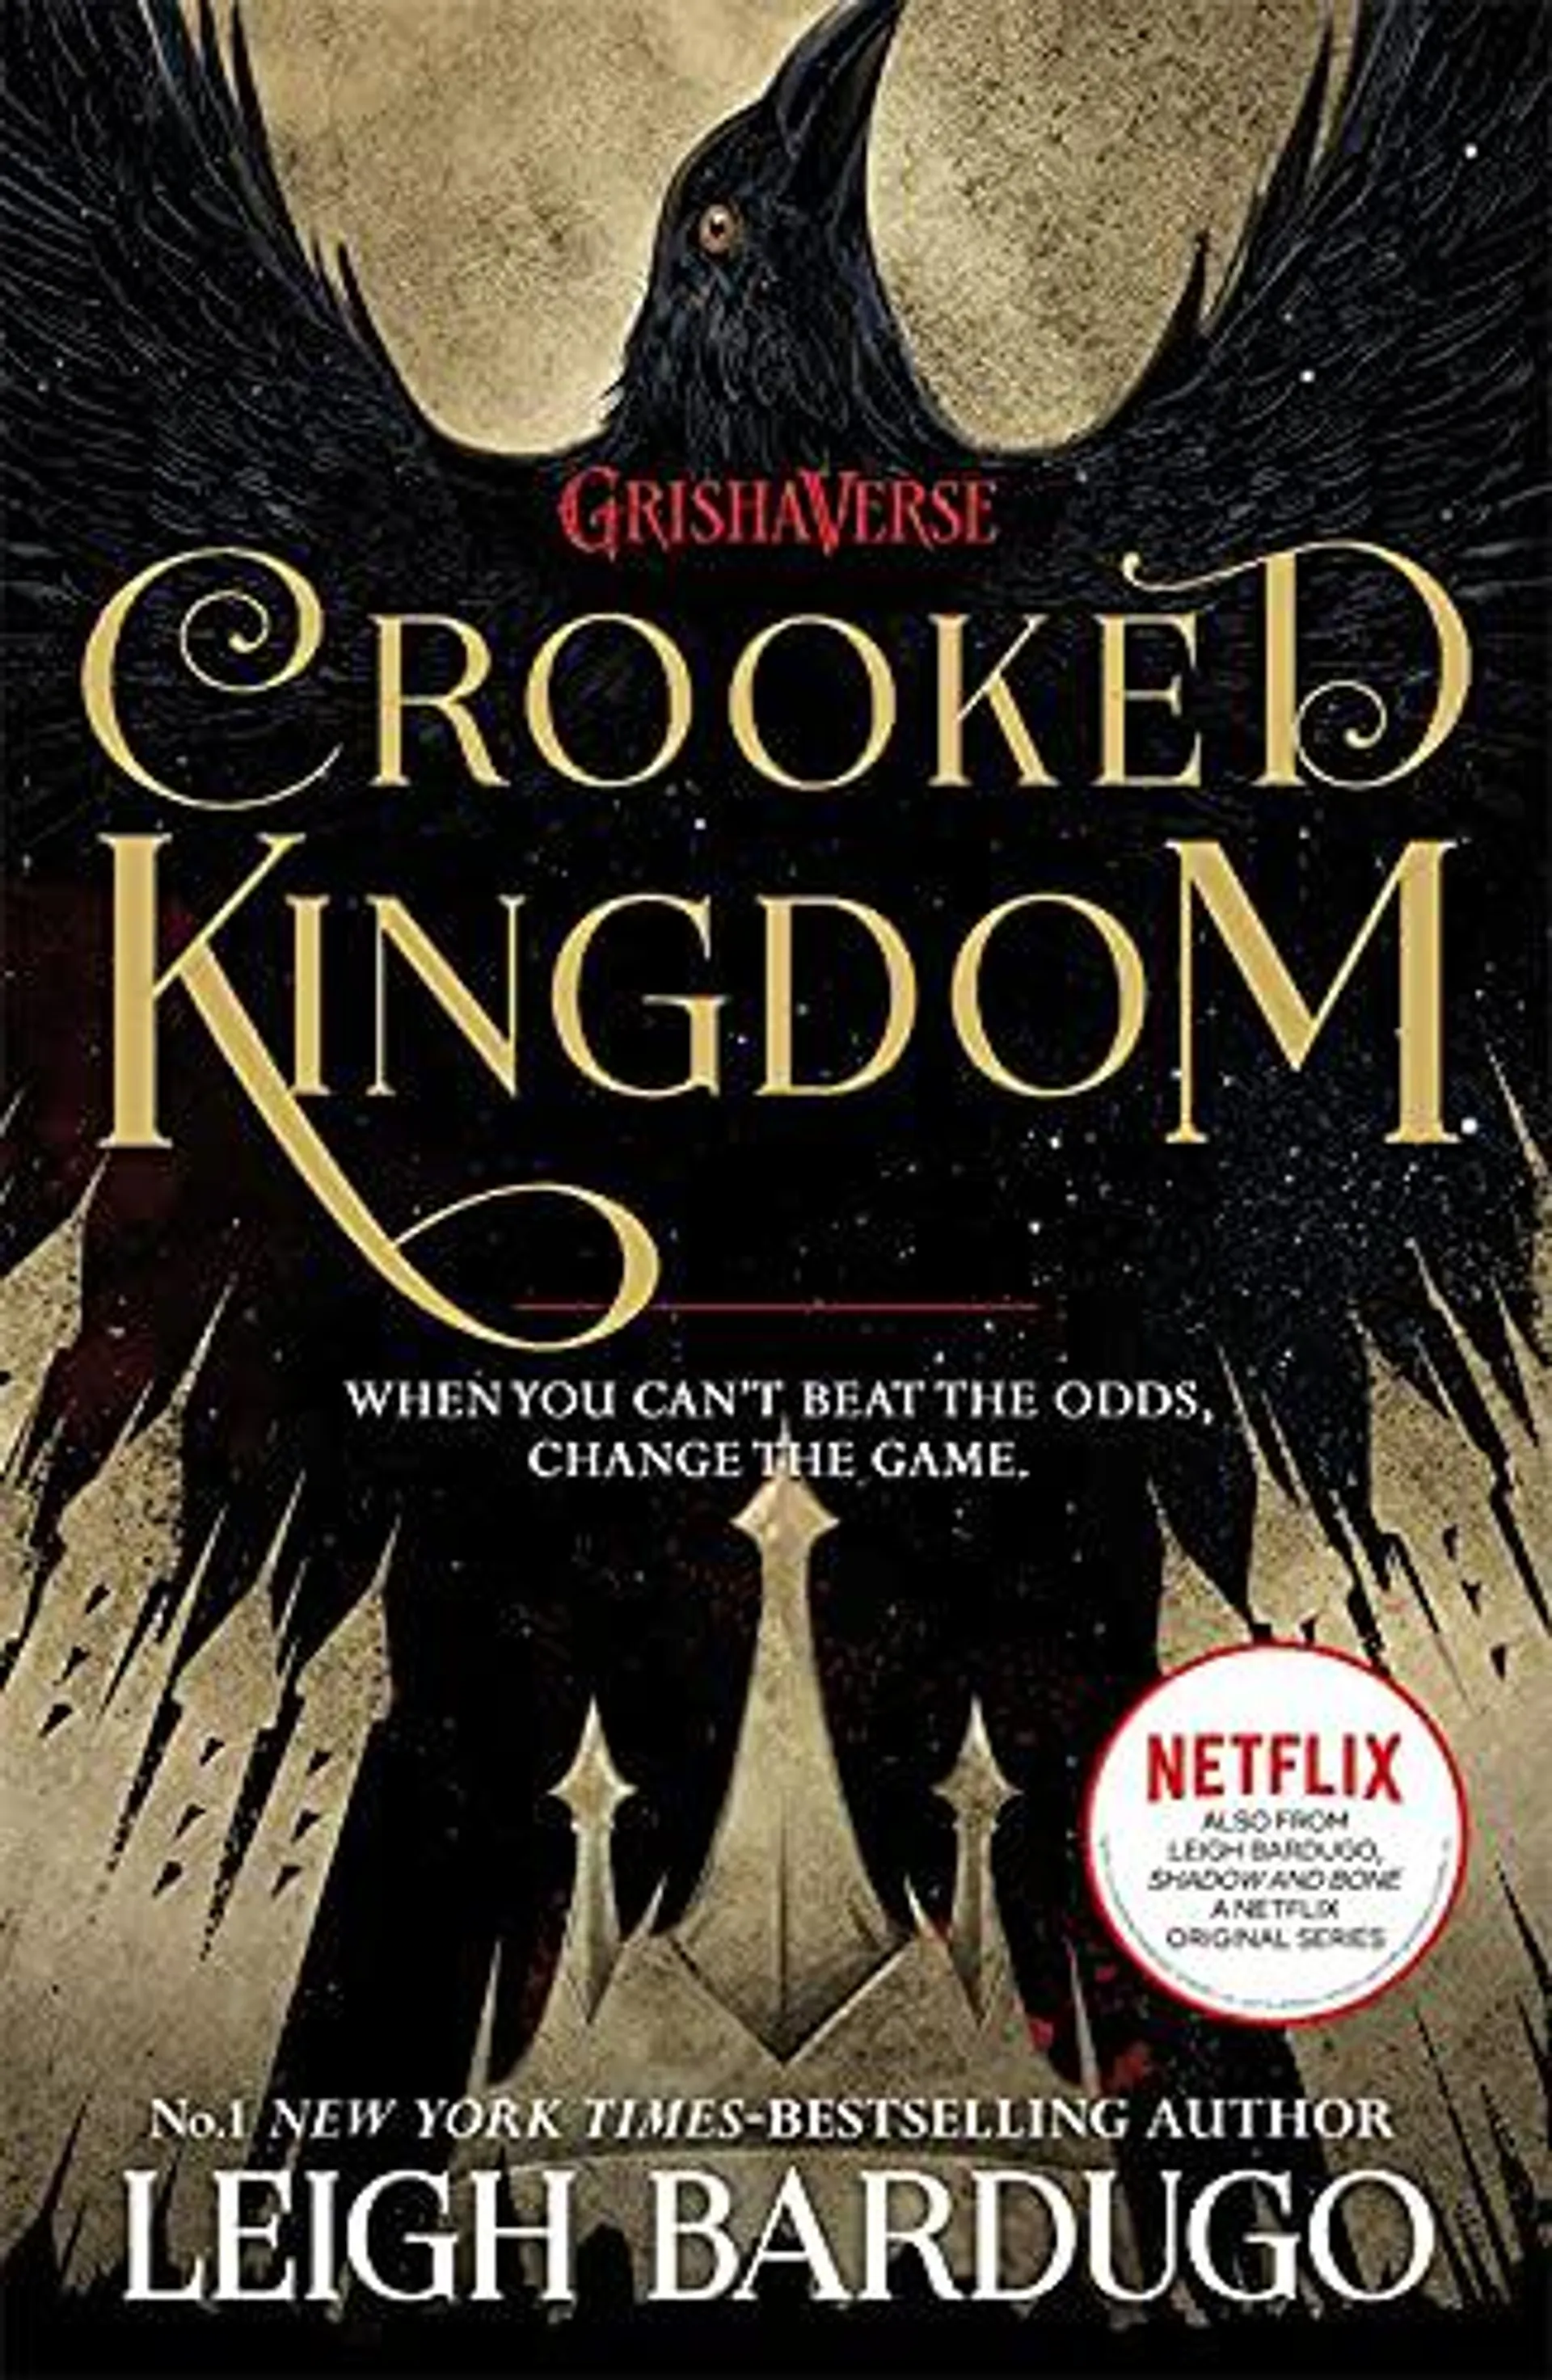 Crooked Kingdom (Six of Crows Book 2) by Leigh Bardugo